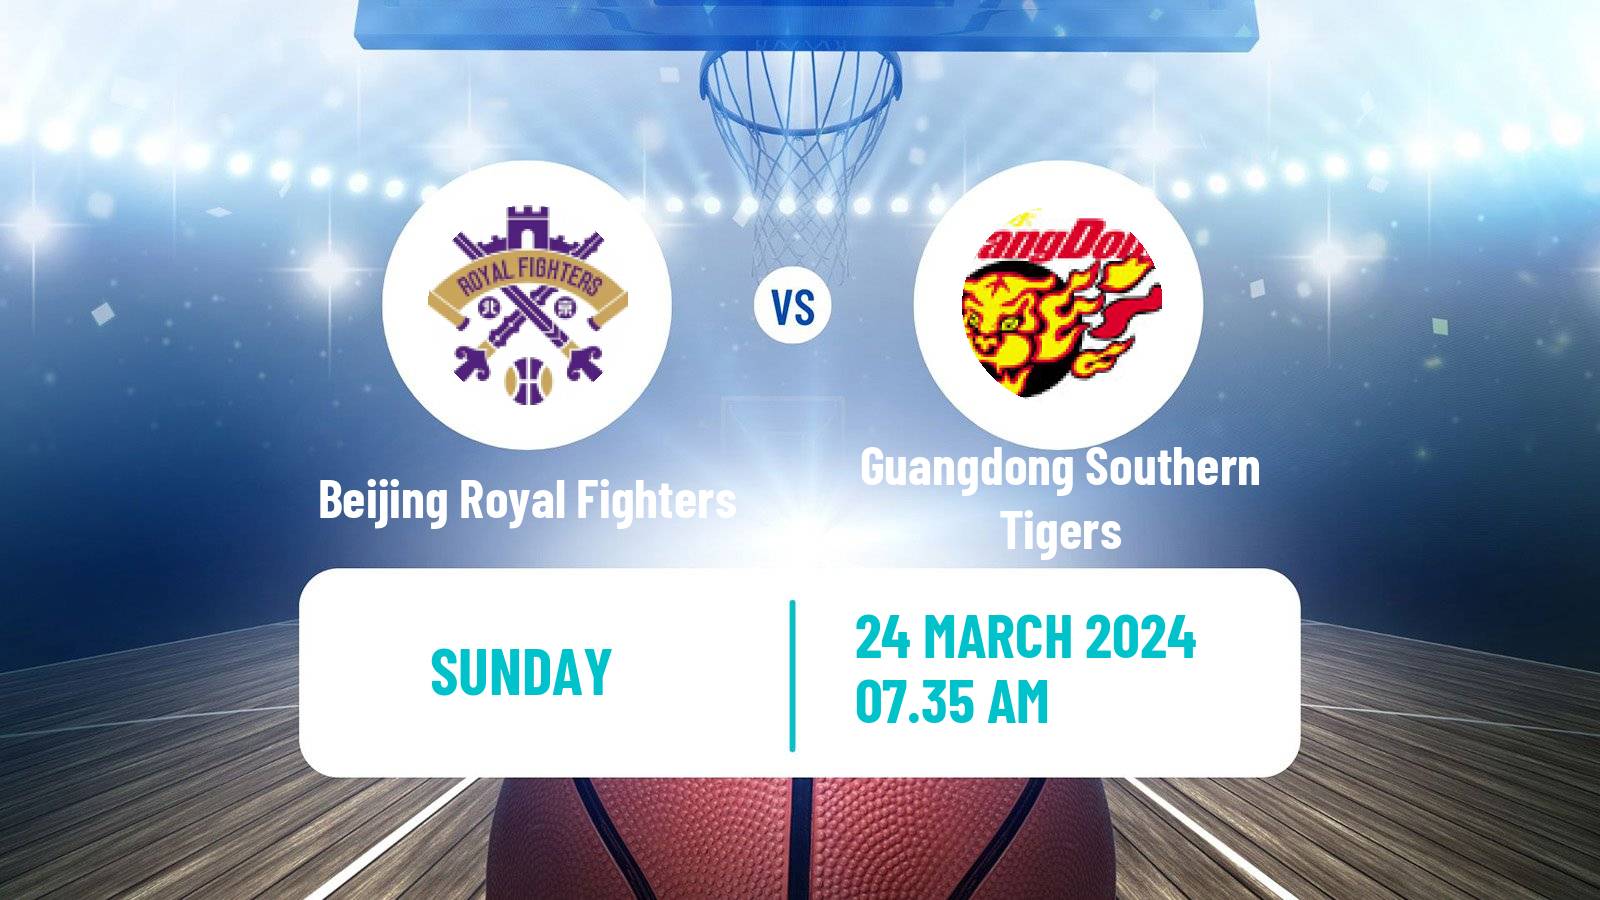 Basketball CBA Beijing Royal Fighters - Guangdong Southern Tigers